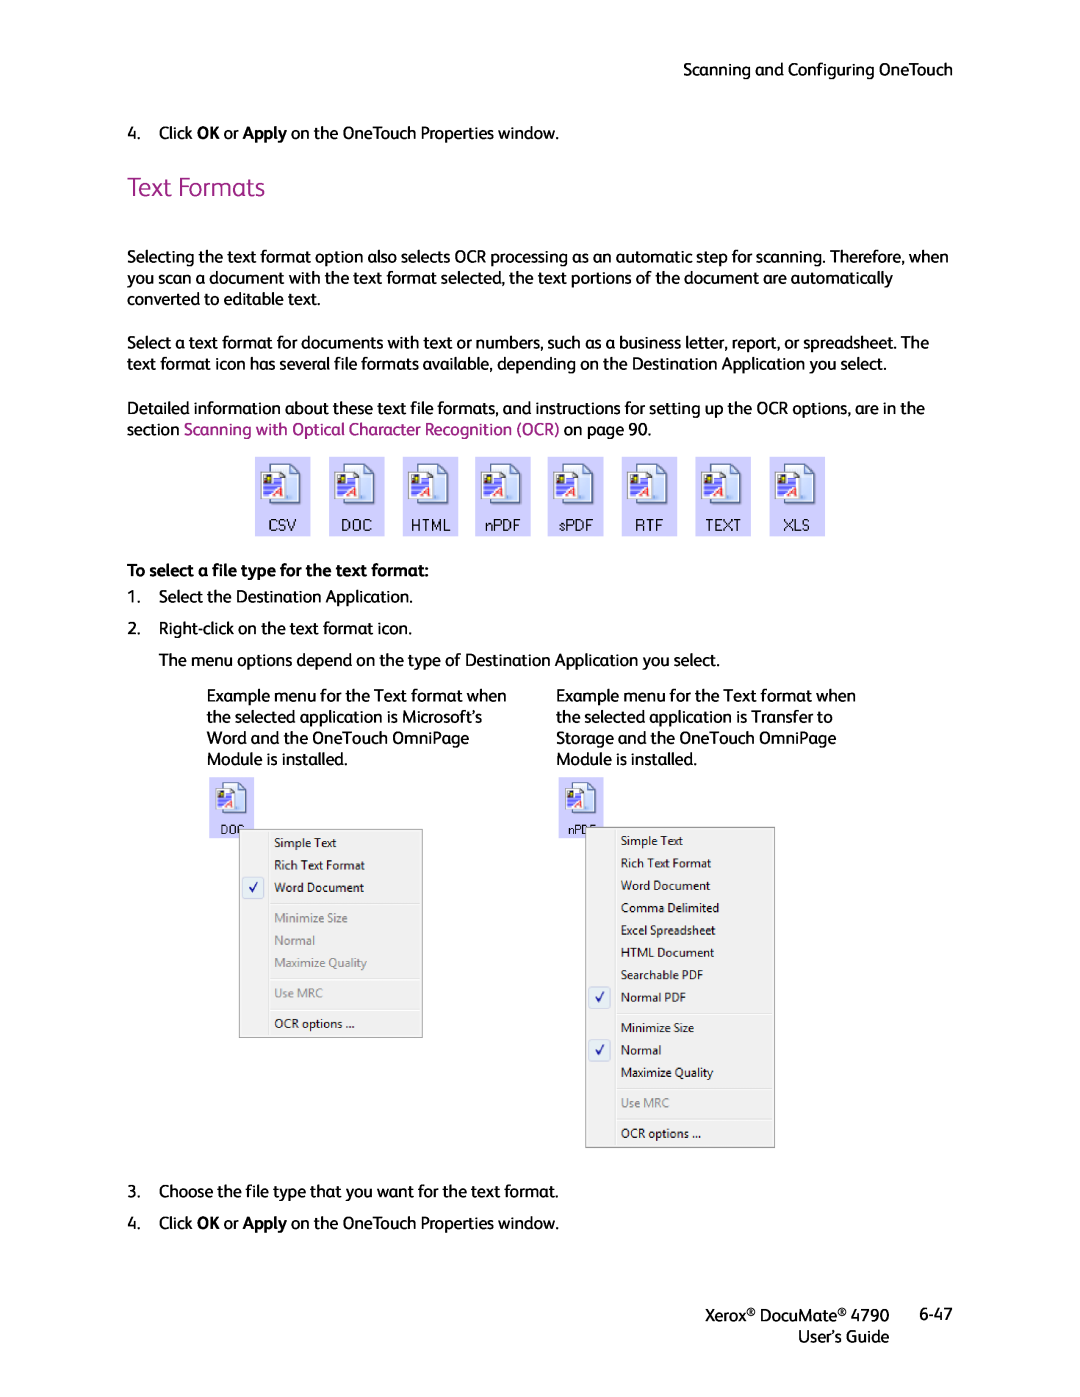 Xerox xerox documate manual Text Formats, To select a file type for the text format 